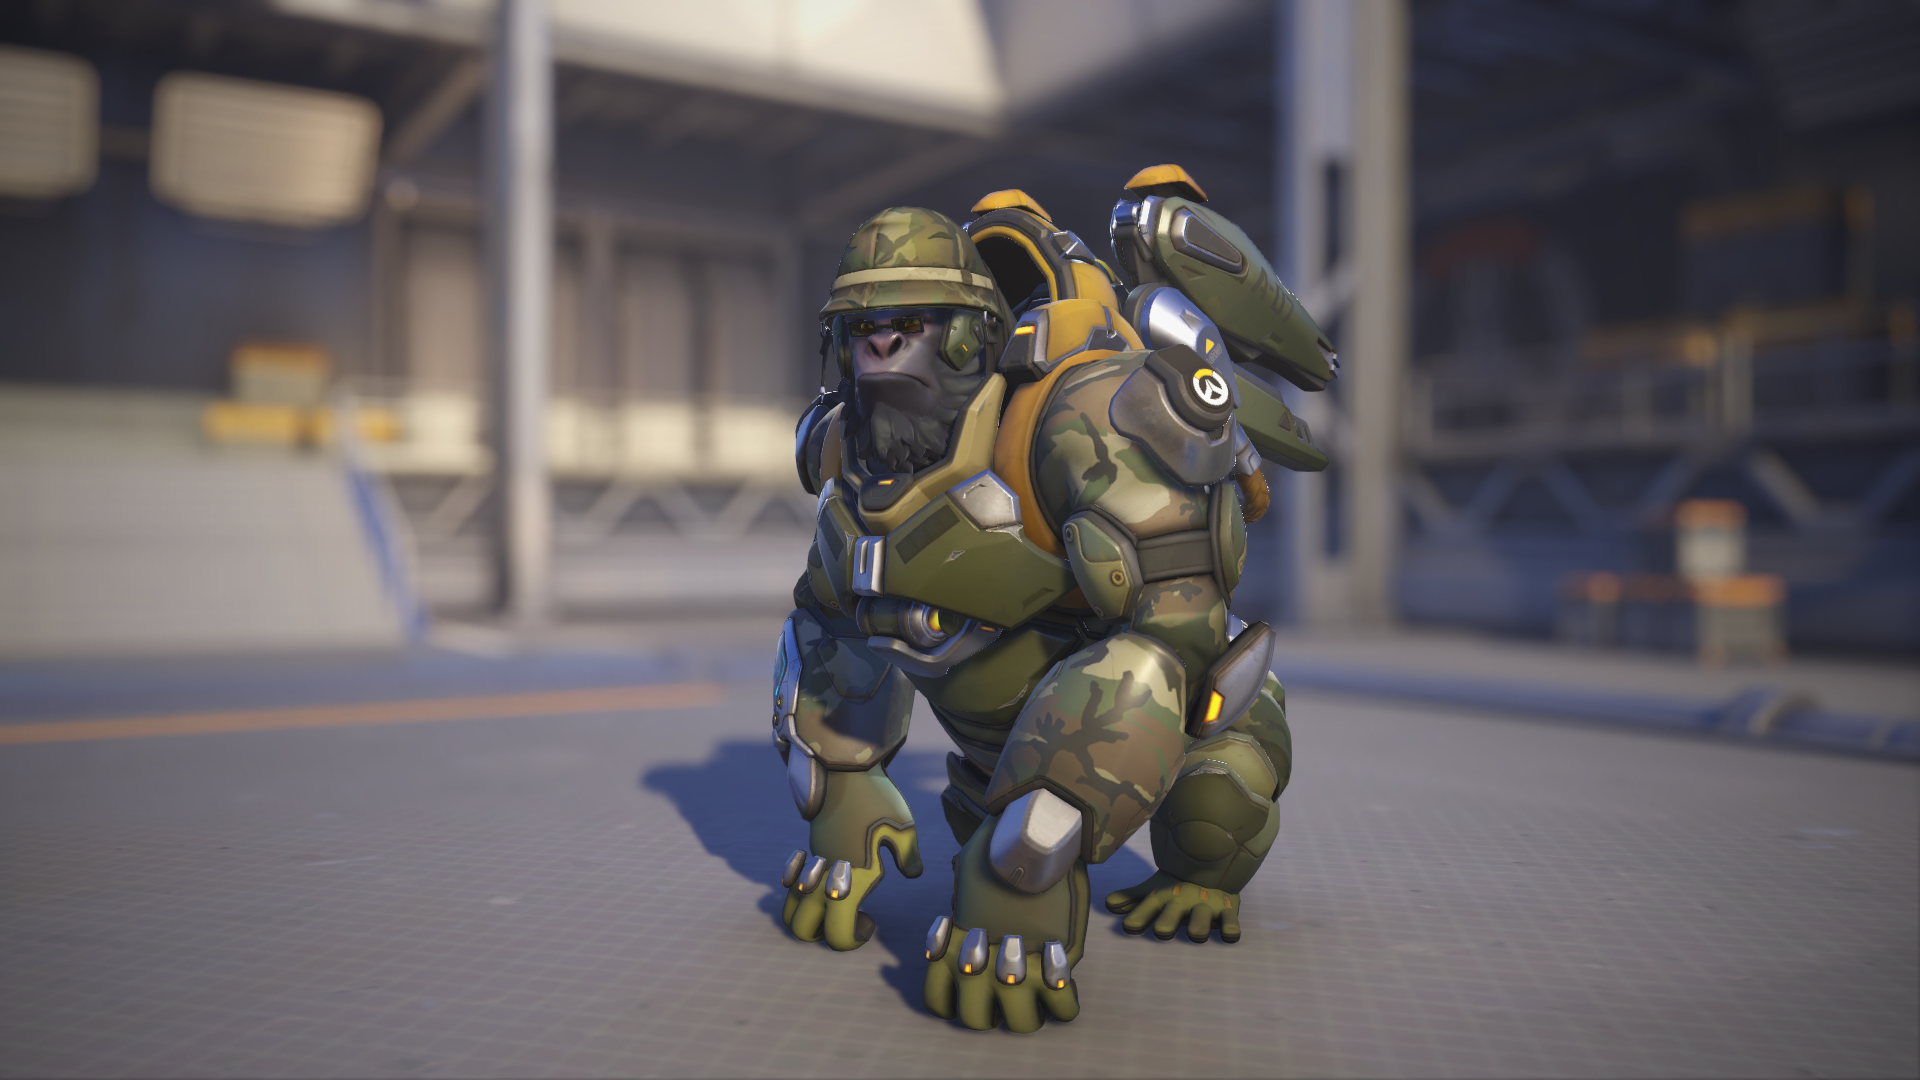 Winston models his Tactical skin in Overwatch 2.